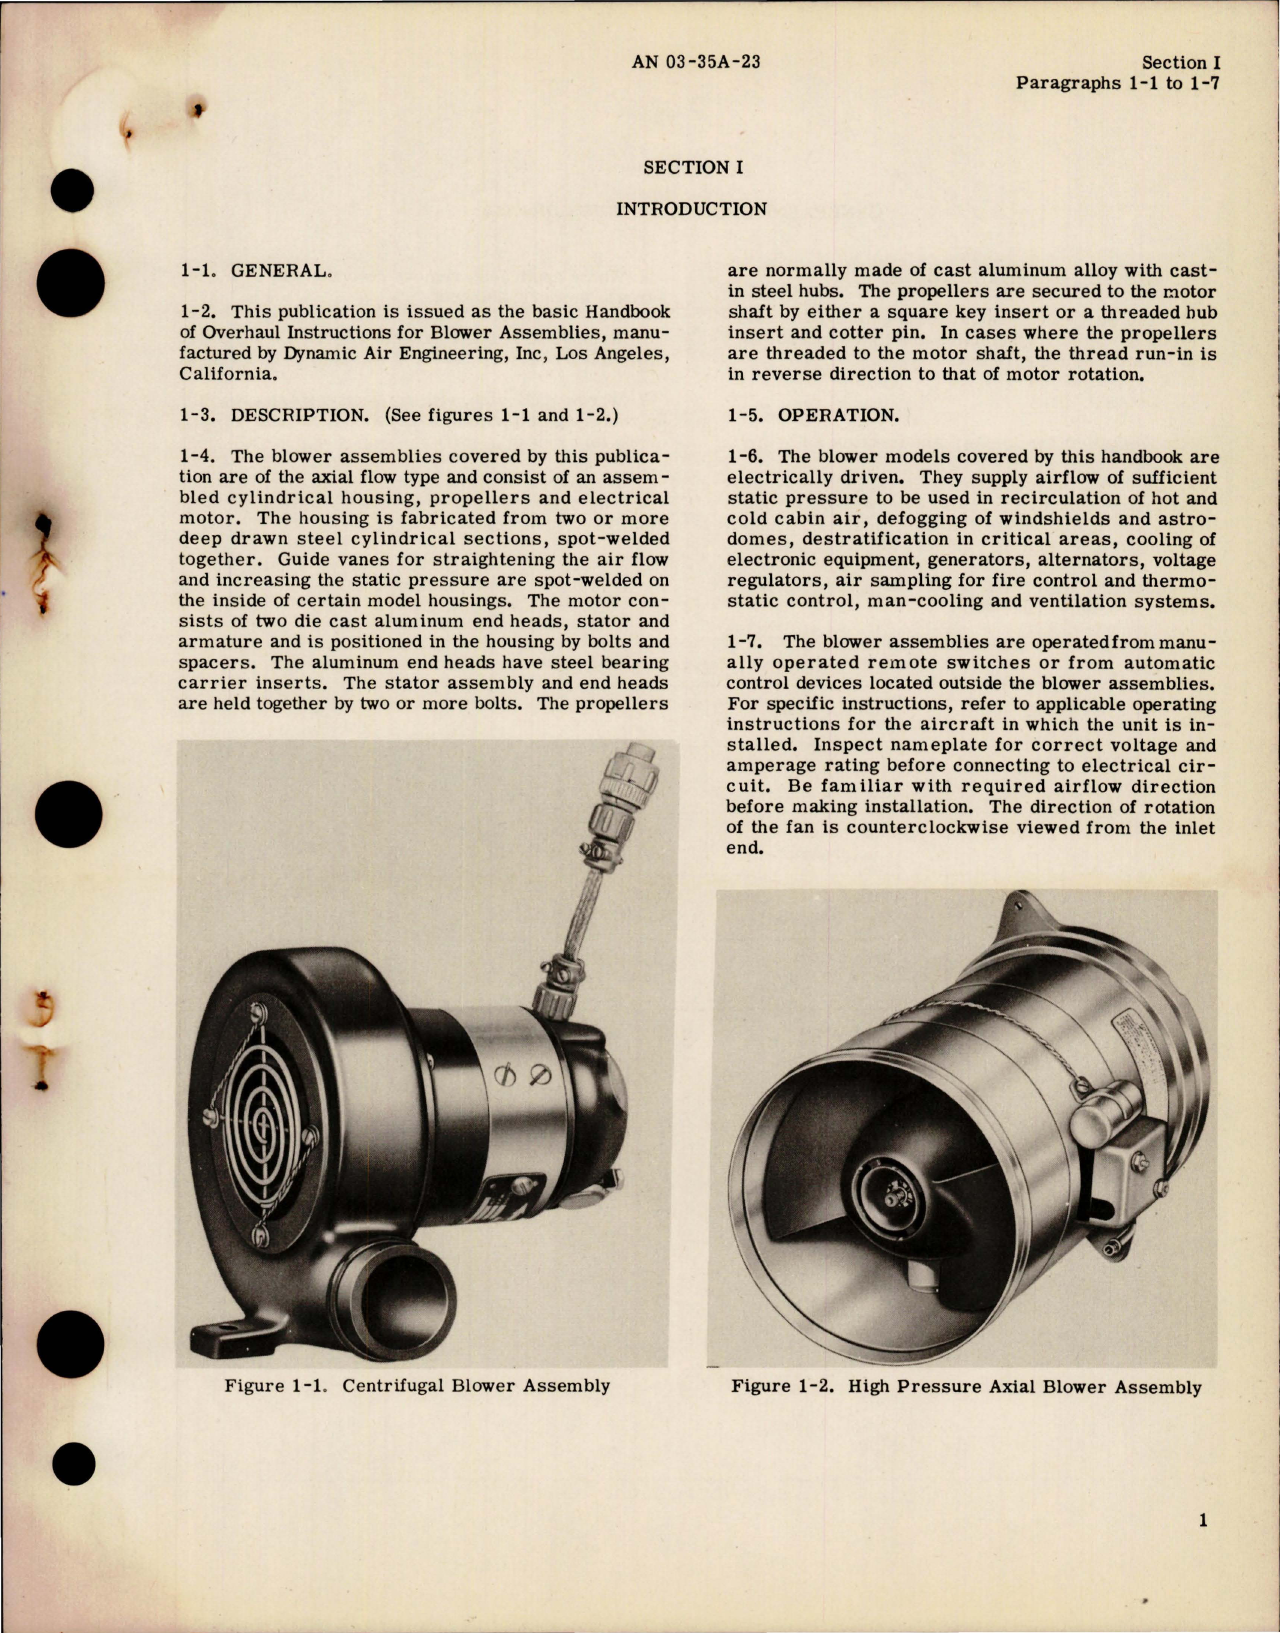 Sample page 5 from AirCorps Library document: Overhaul Instructions for Blower Assemblies 